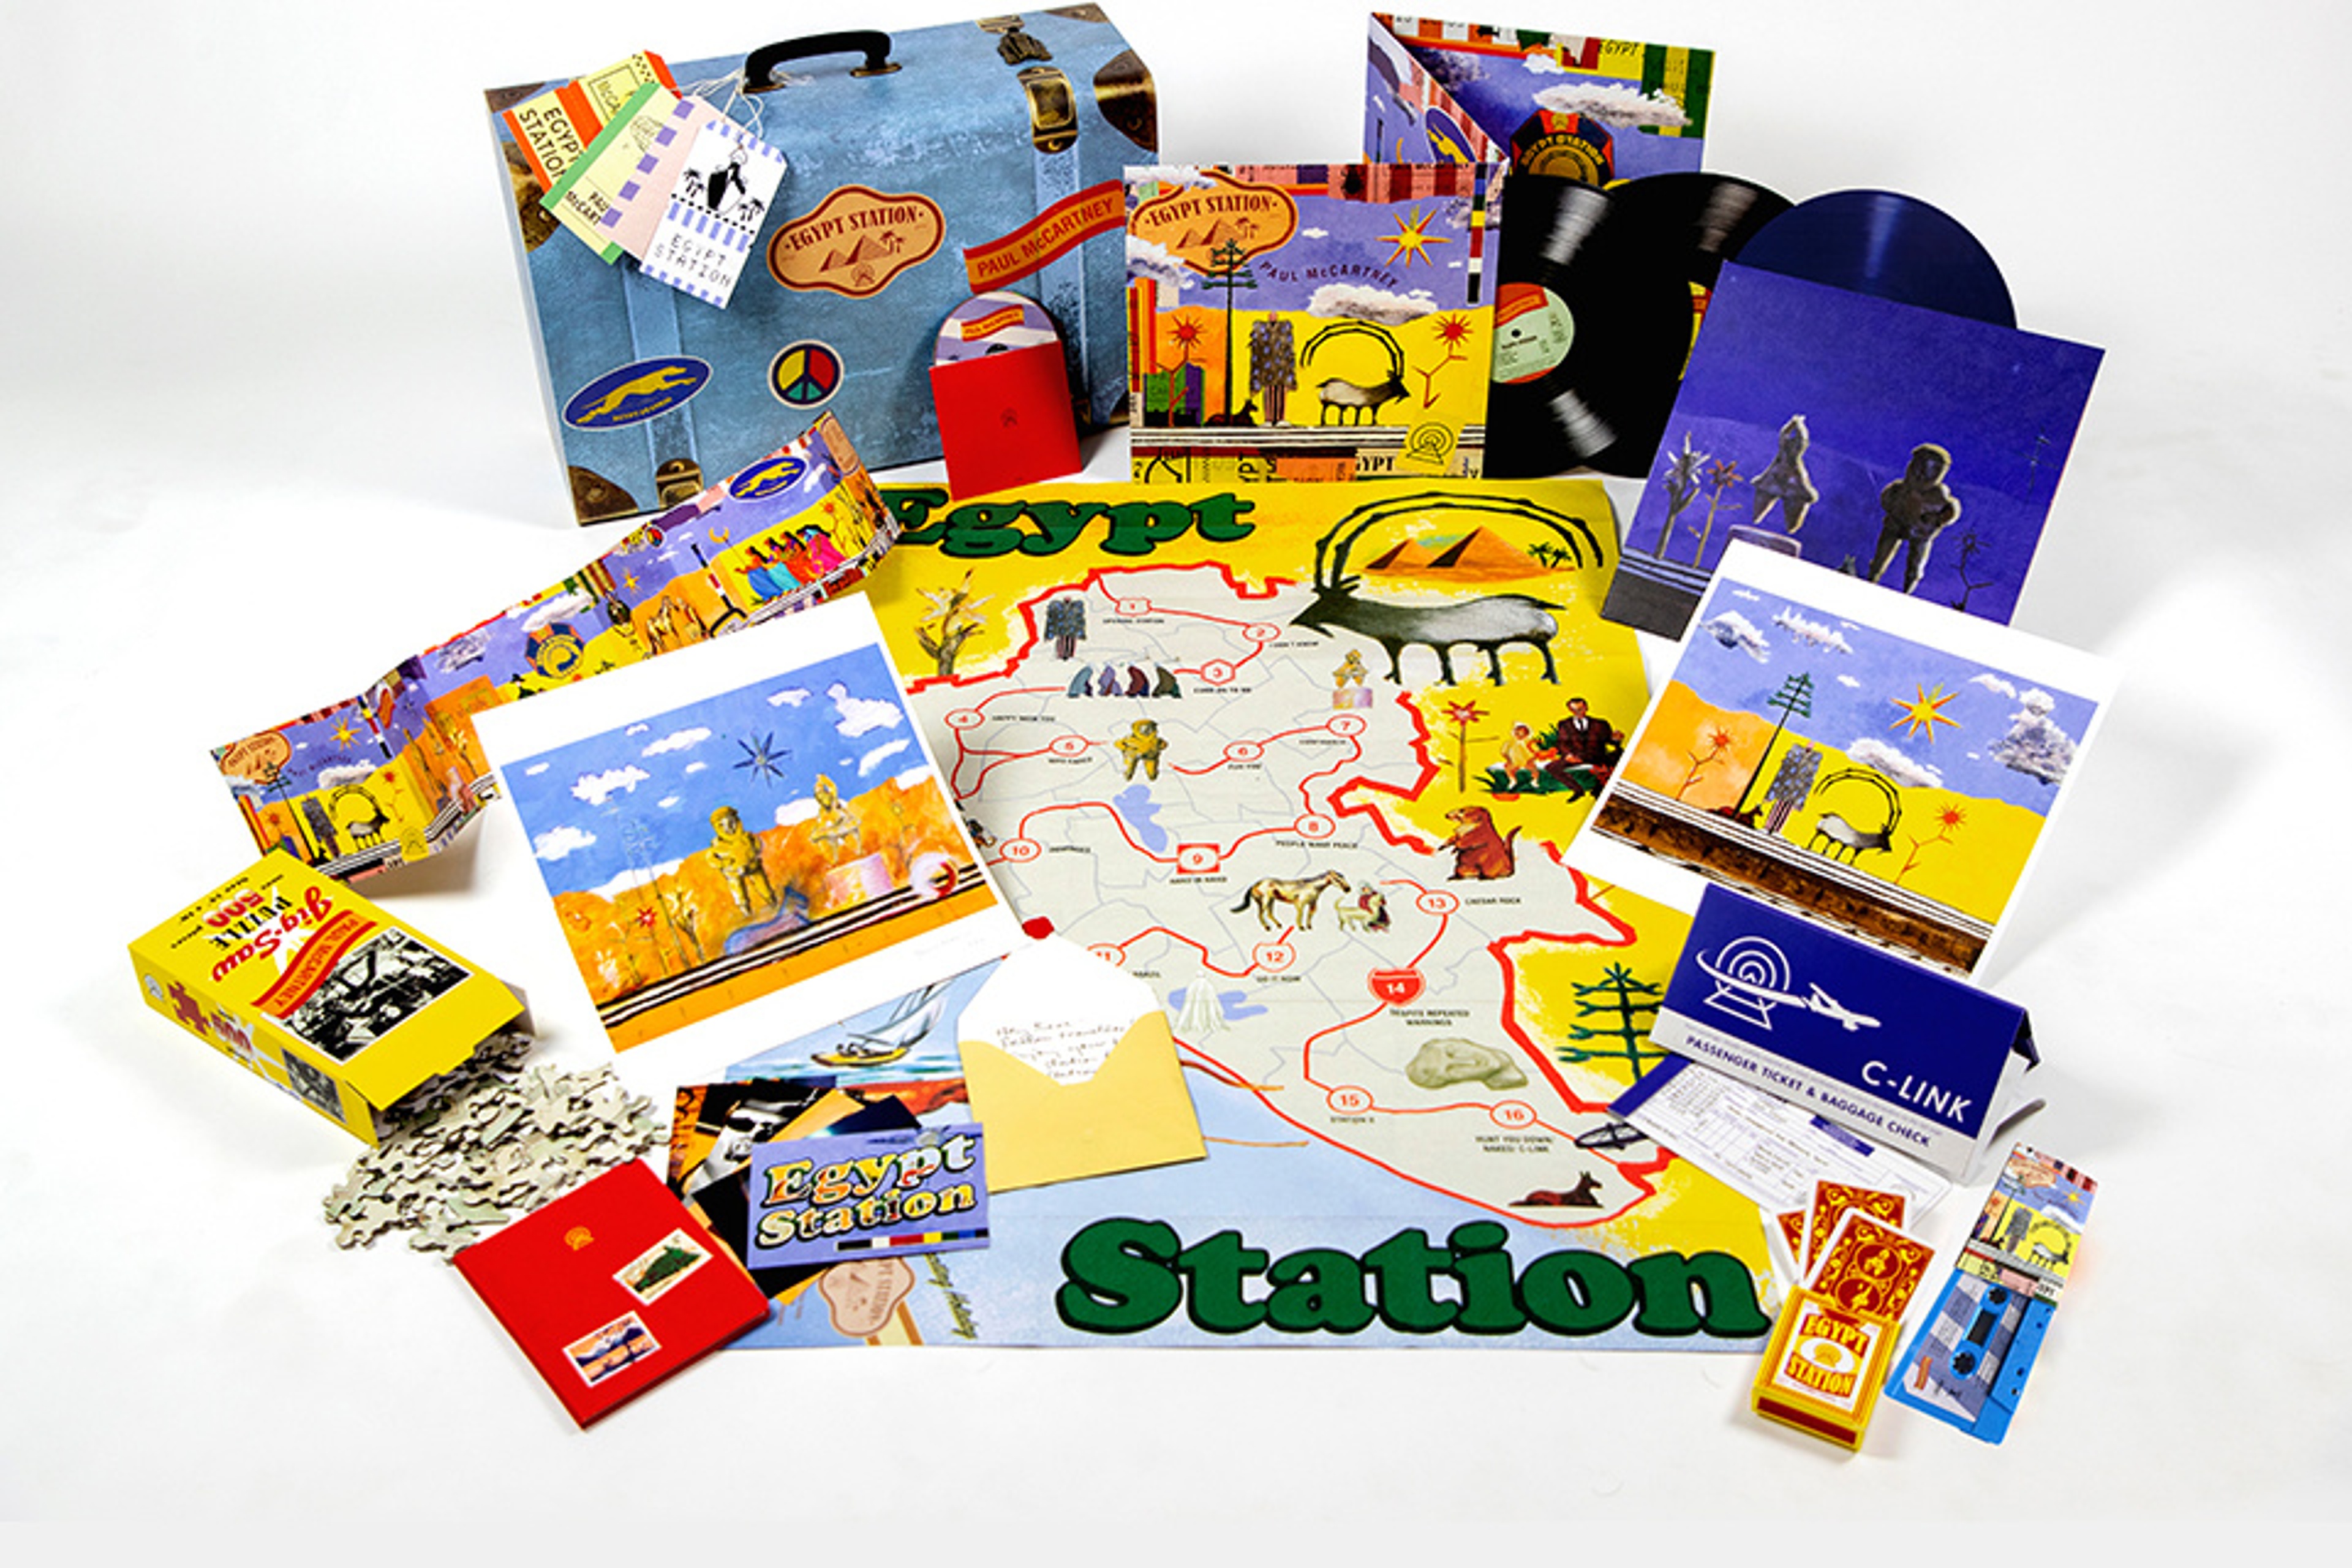 'Egypt Station - Traveller’s Edition' New Box Set to be released in May